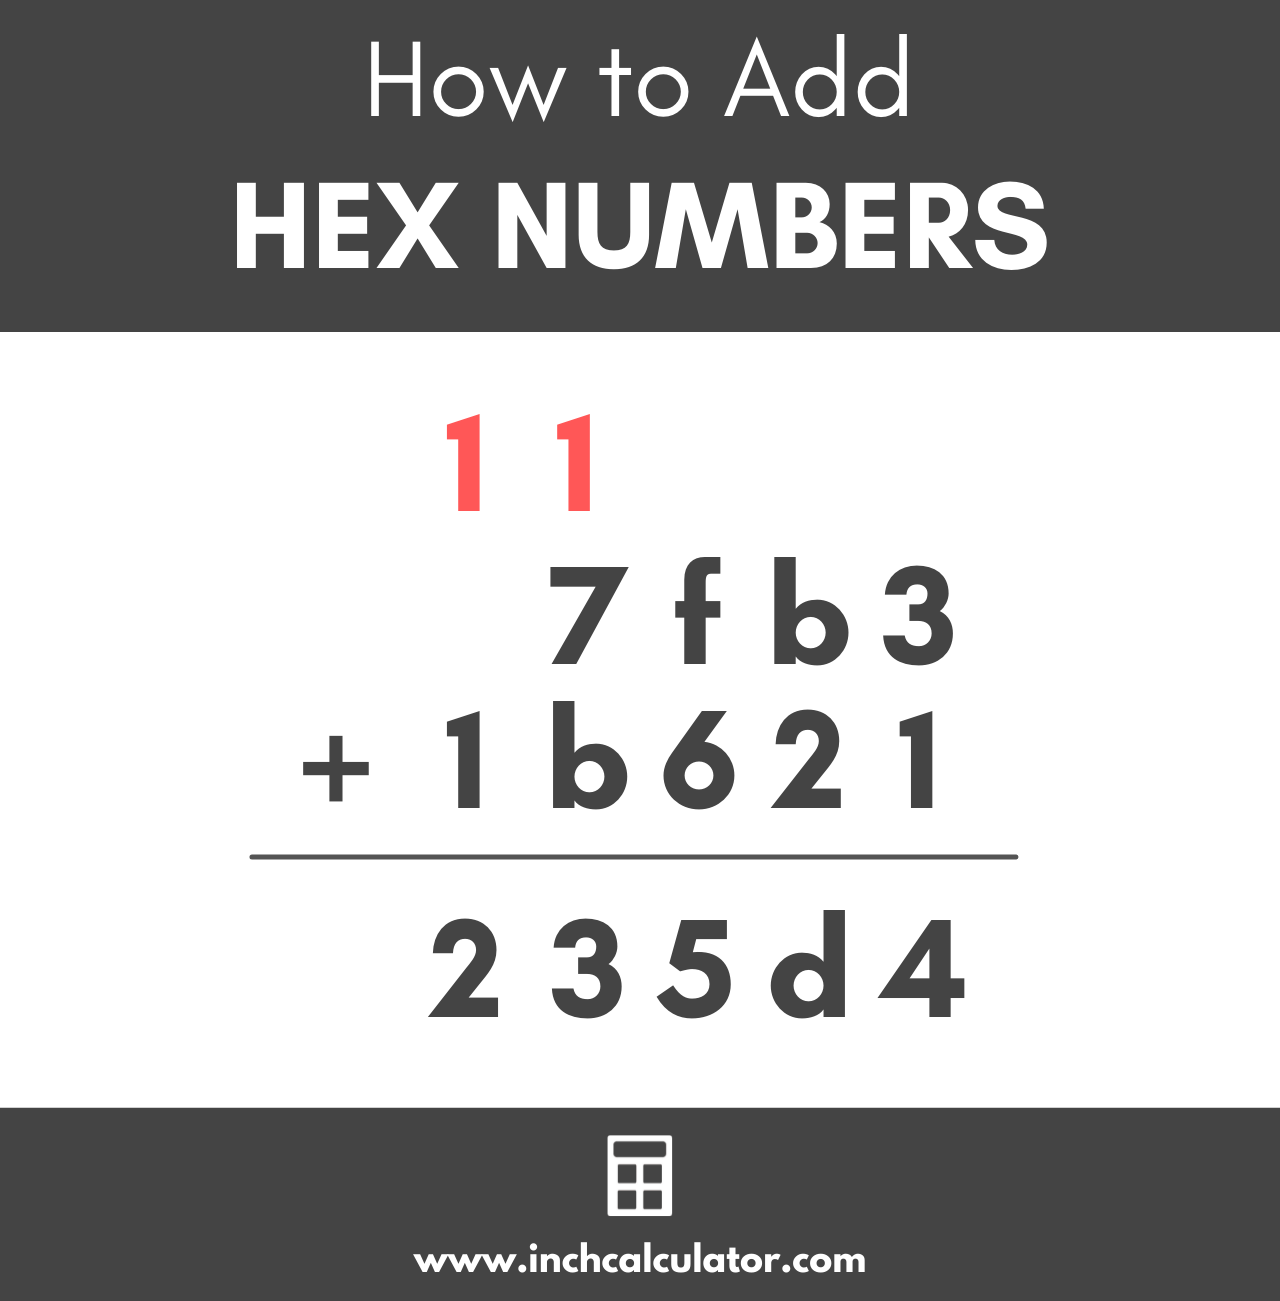 graphic showing how to add hexadecimal numbers